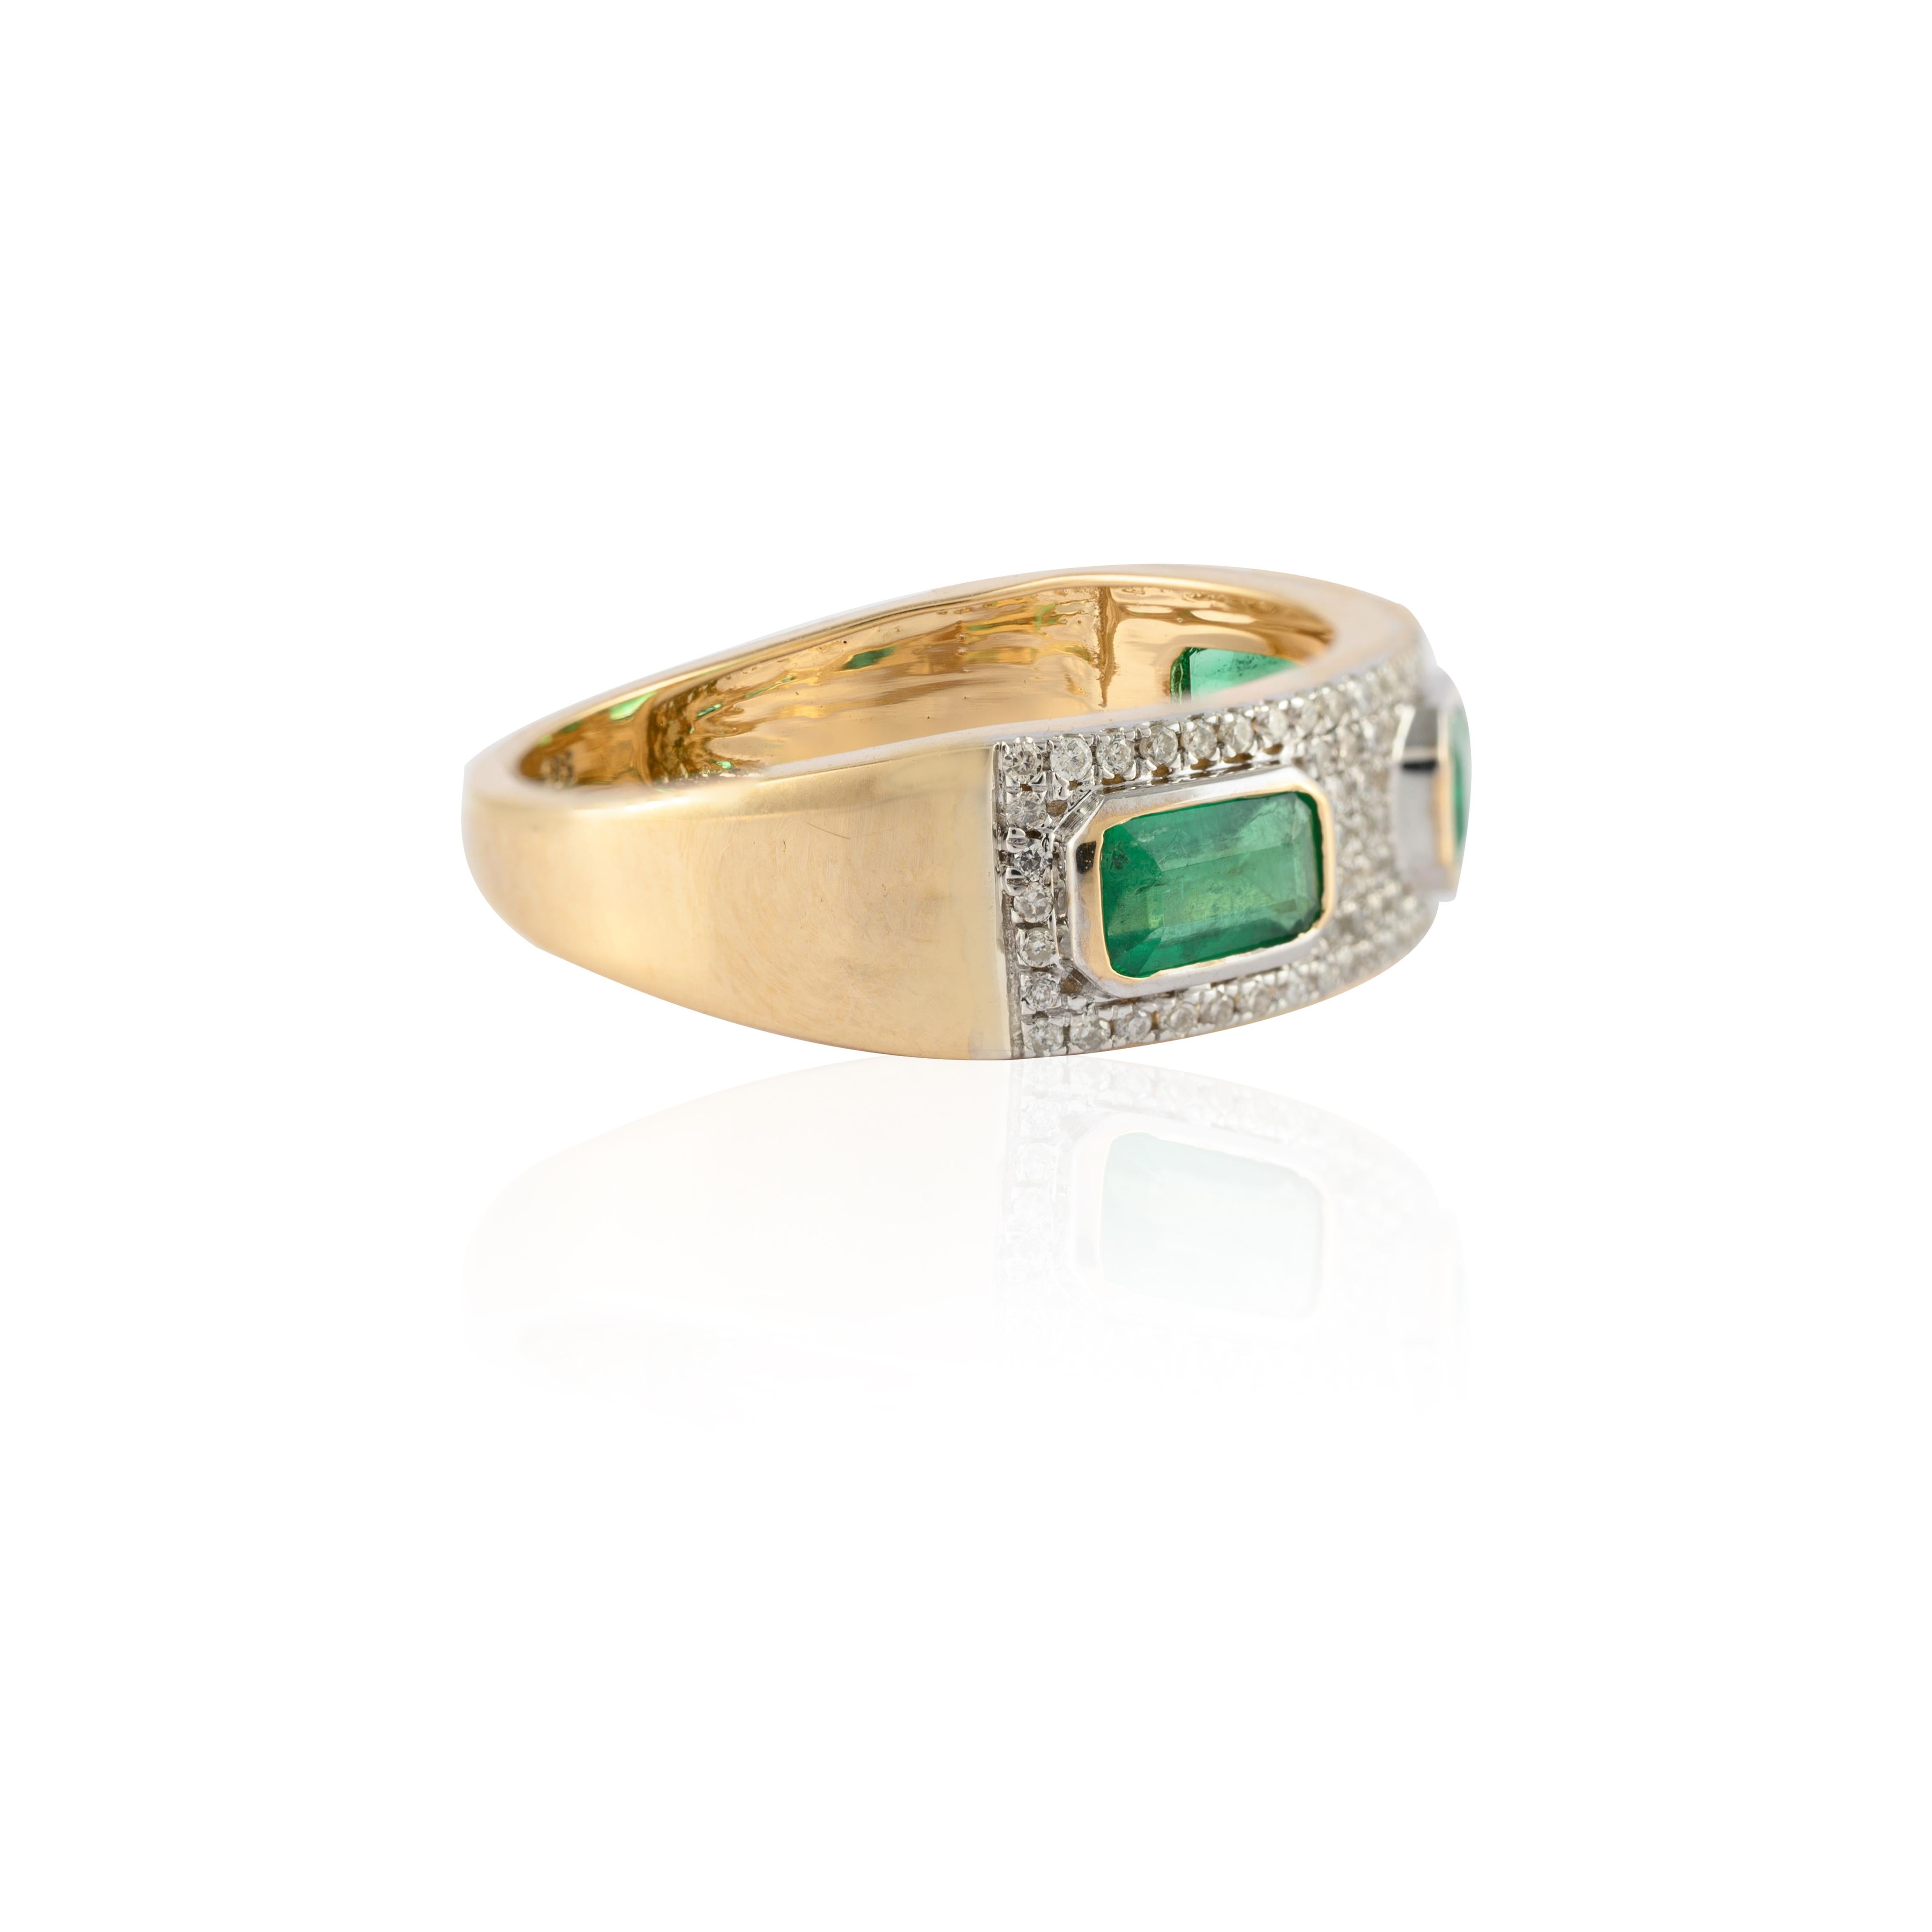 For Sale:  Impeccable Three Stone Emerald and Diamond Engagement Ring in 14k Yellow Gold 3